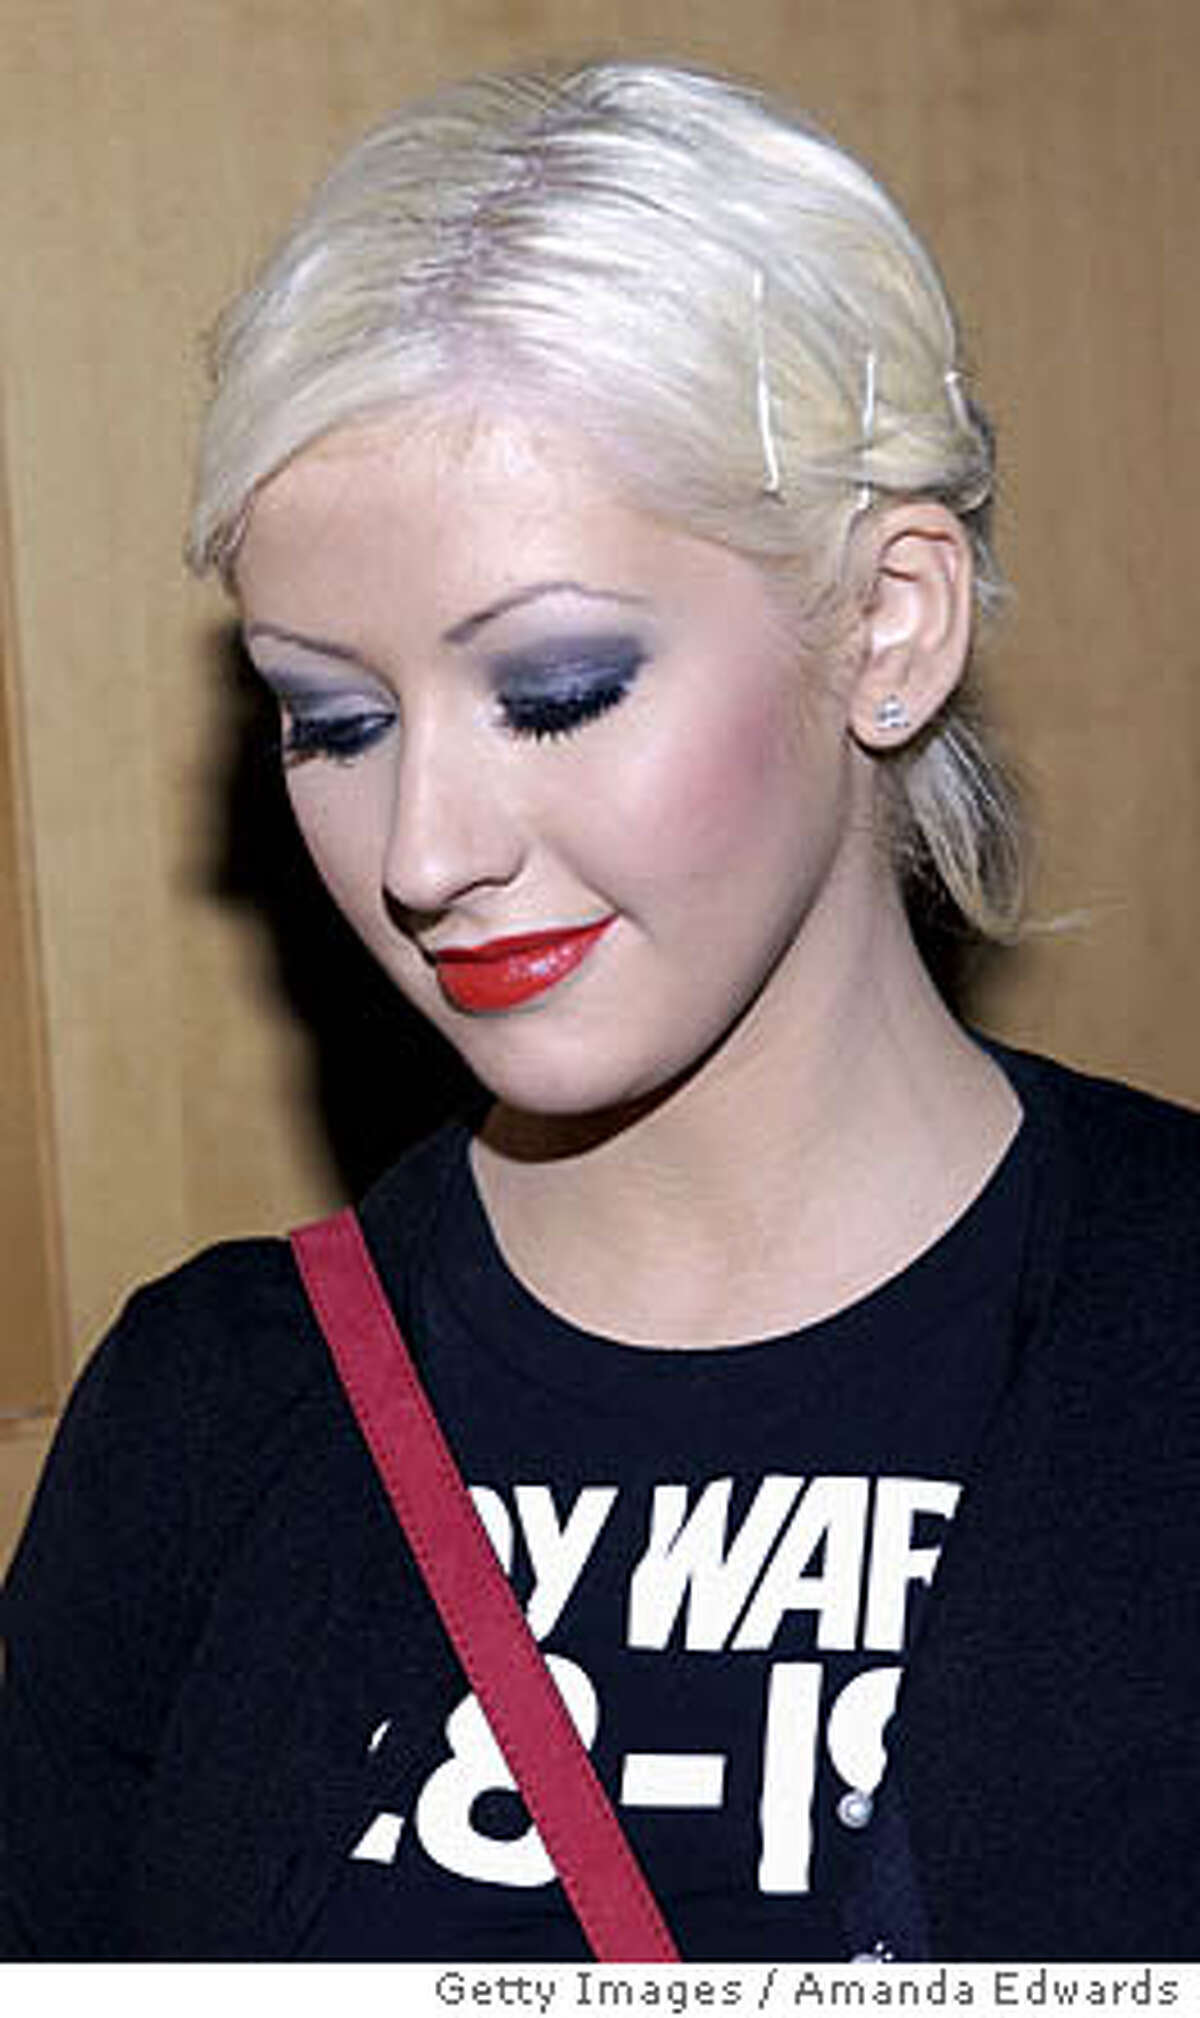 BEVERLY HILLS, CA - MARCH 13: (U.S. TABS AND HOLLYWOOD REPORTER OUT) Singer Christina Aguilera arrives at a screening of "Don't Move" on March 13, 2005 at the Clarity Screening Room in Beverly Hills, California. (Photo by Amanda Edwards/Getty Images) *** Local Caption *** Christina Aguilera